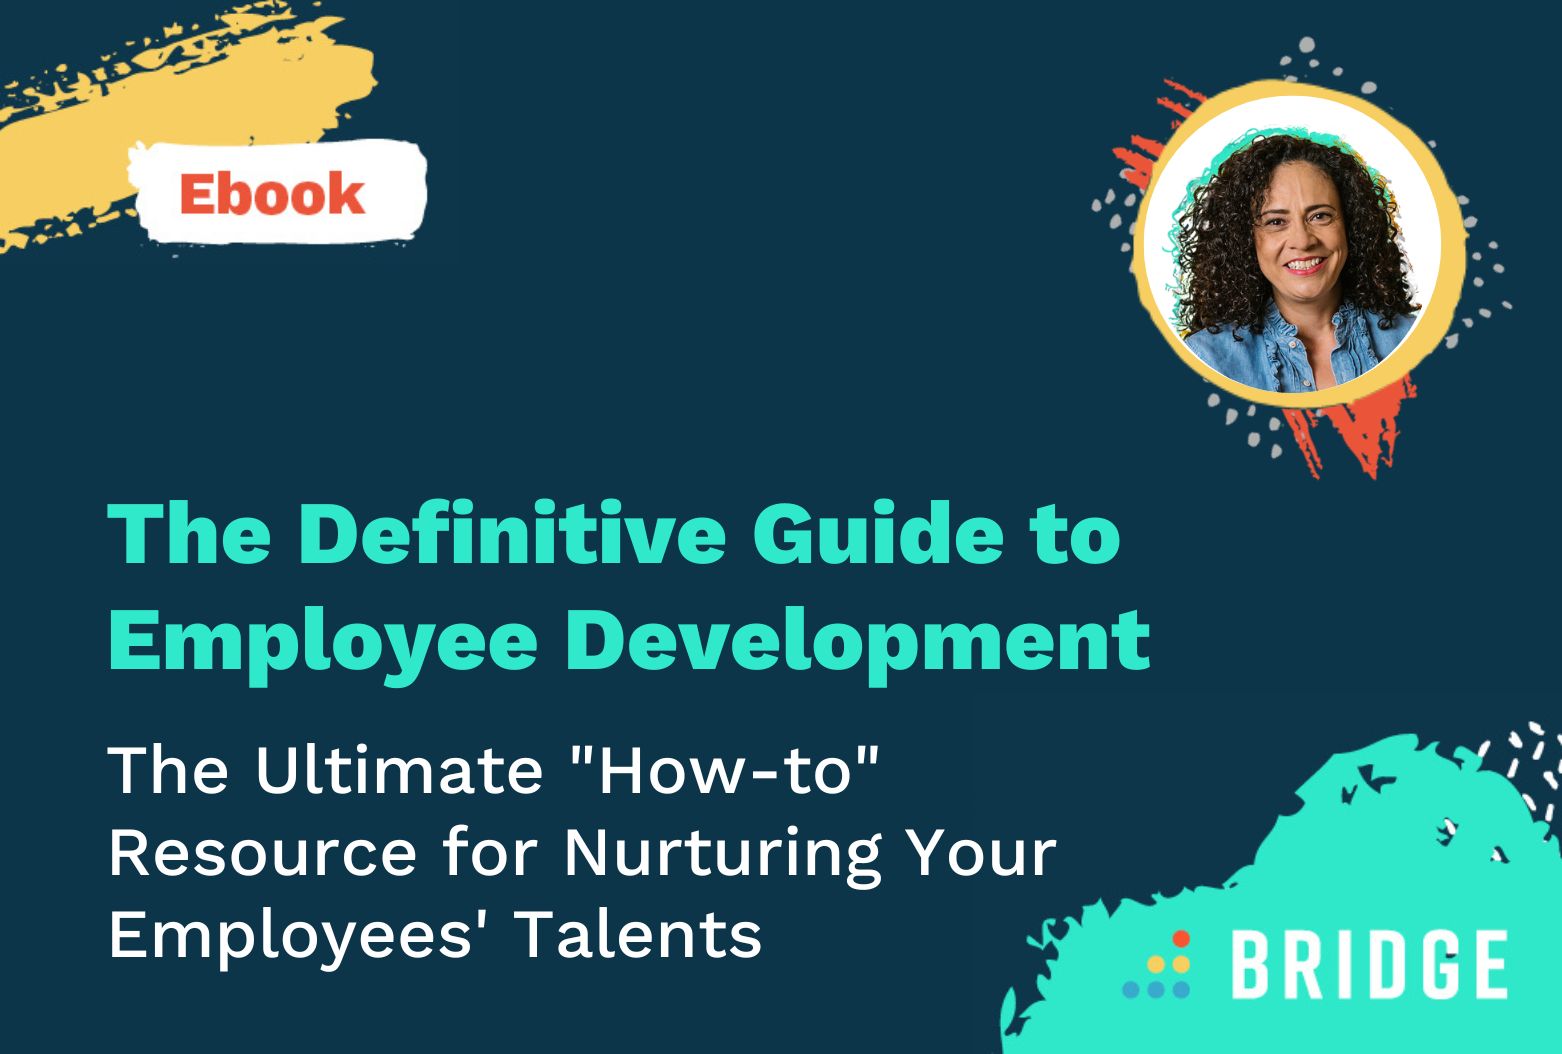 The_Definitive_Guide_to_Employee_Development - Featured Image